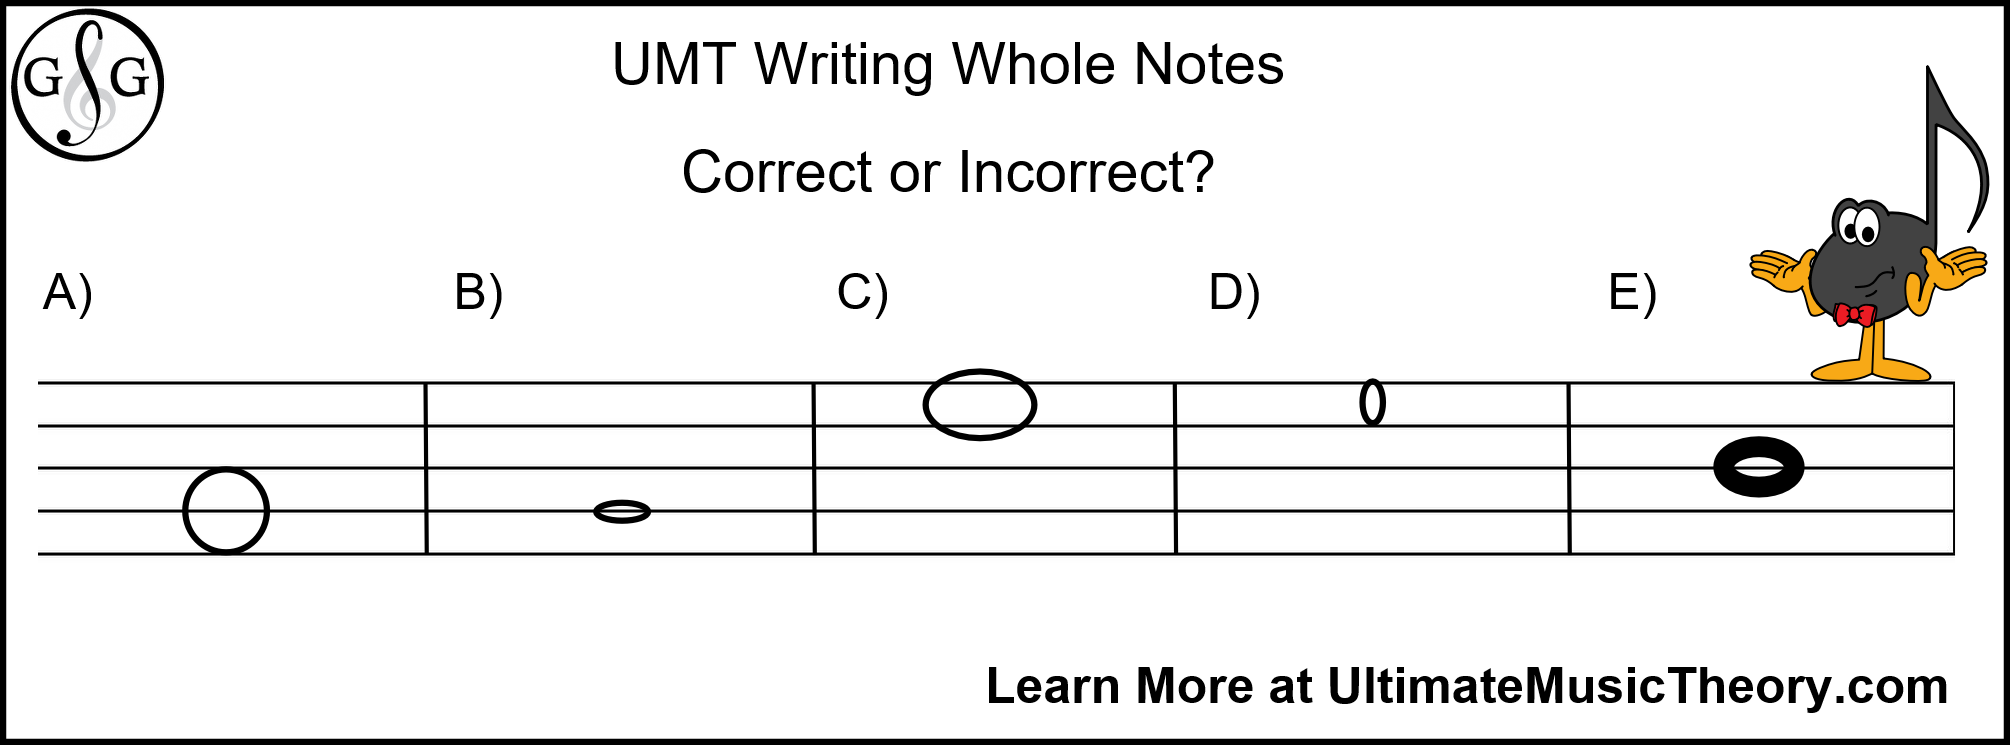 Ultimate Music Theory Writing Whole Notes